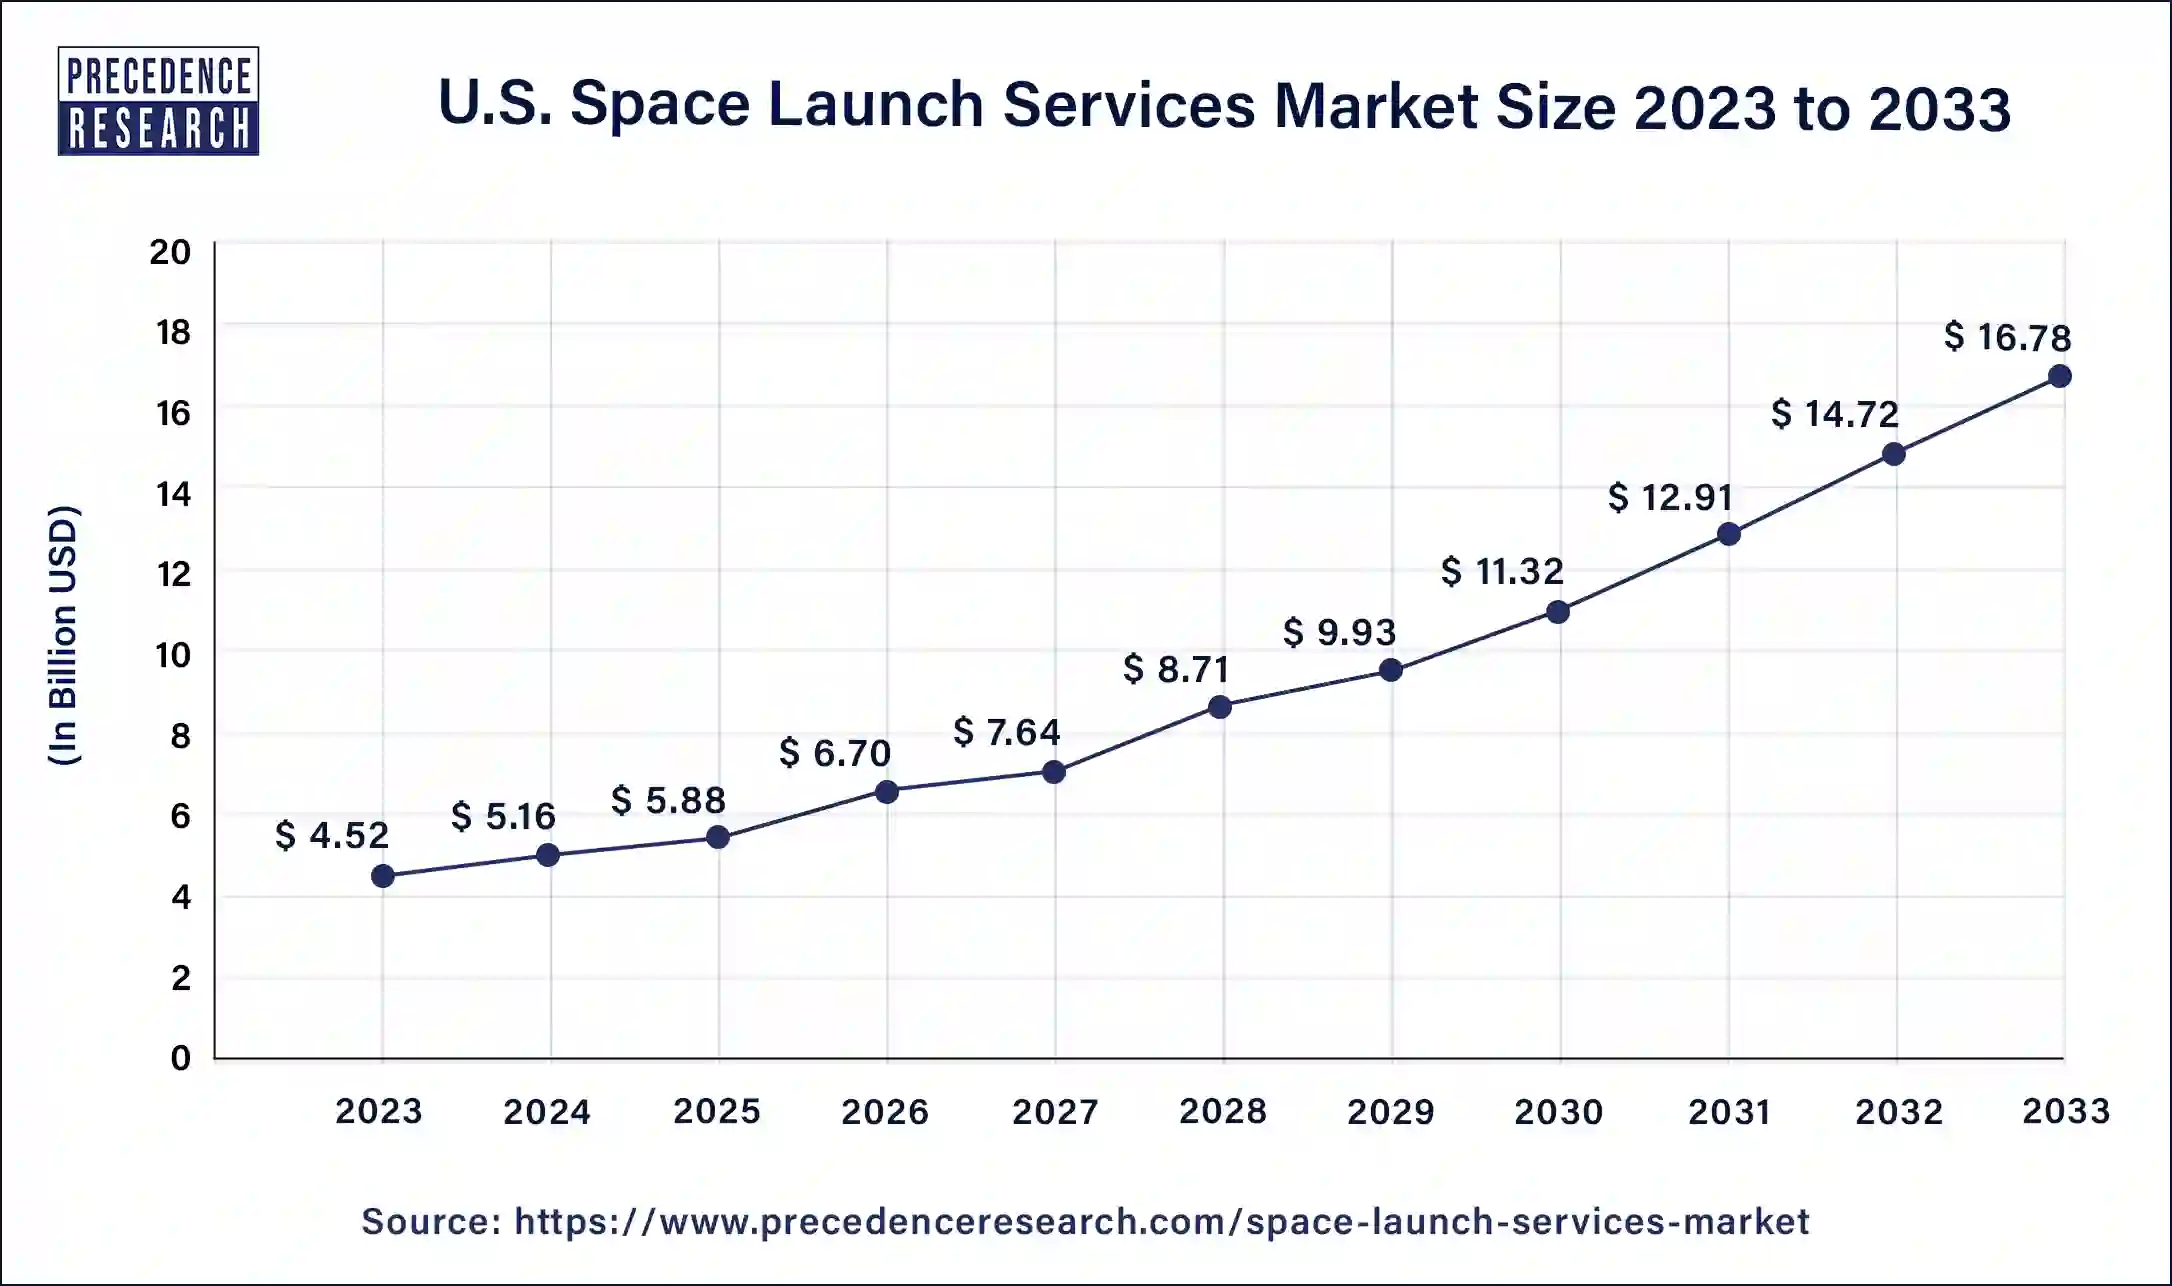 U.S. Space Launch Services Market Size 2024 to 2033